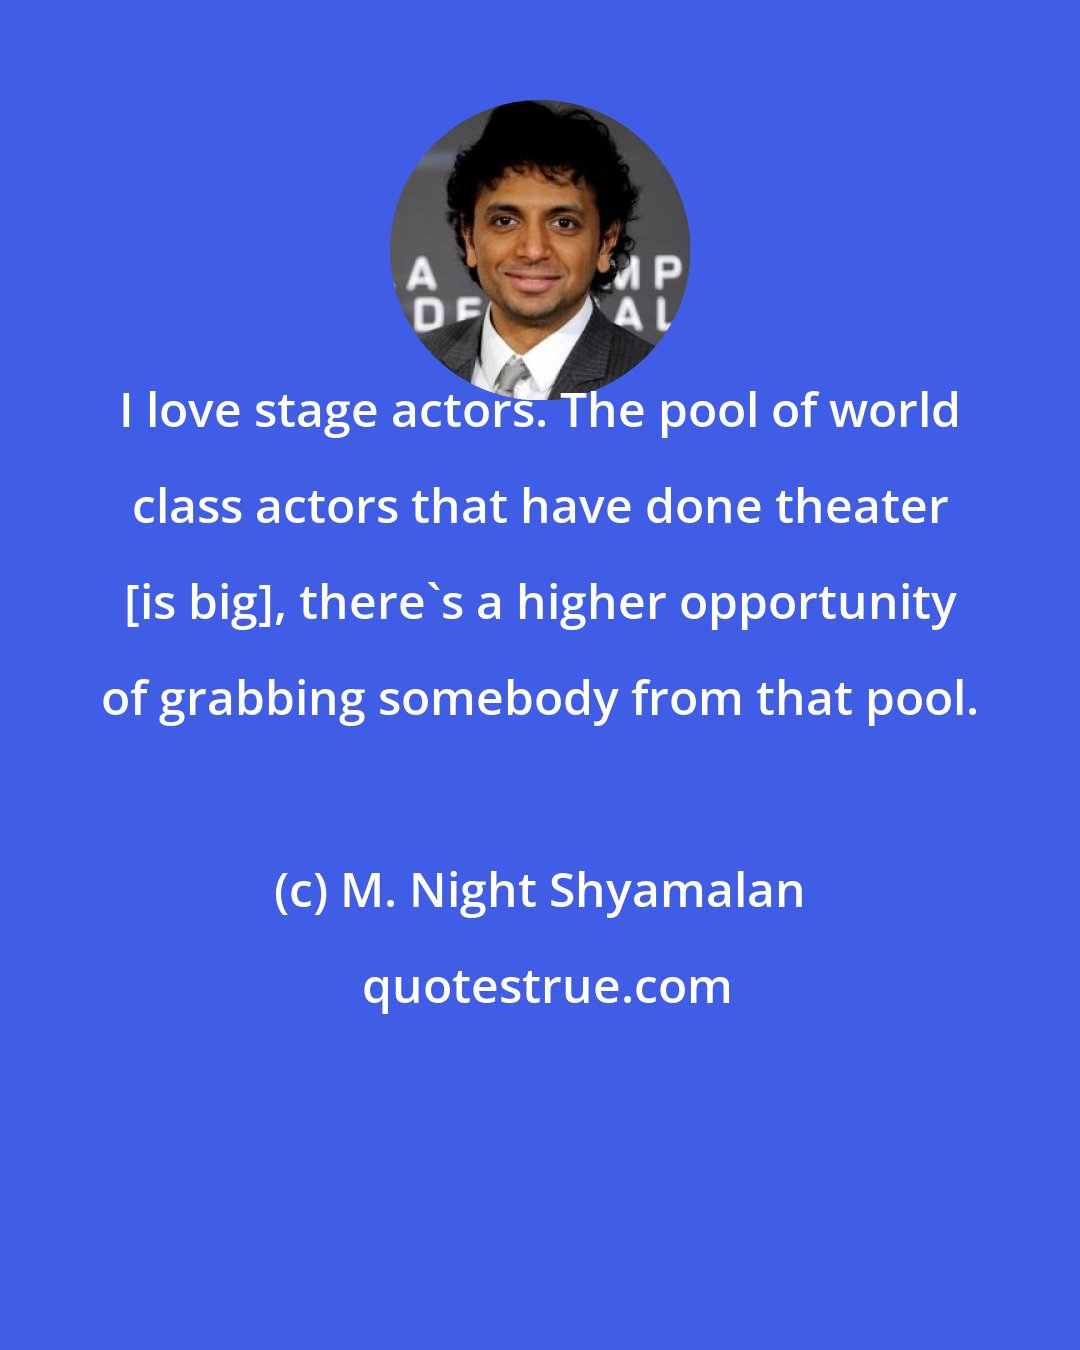 M. Night Shyamalan: I love stage actors. The pool of world class actors that have done theater [is big], there's a higher opportunity of grabbing somebody from that pool.